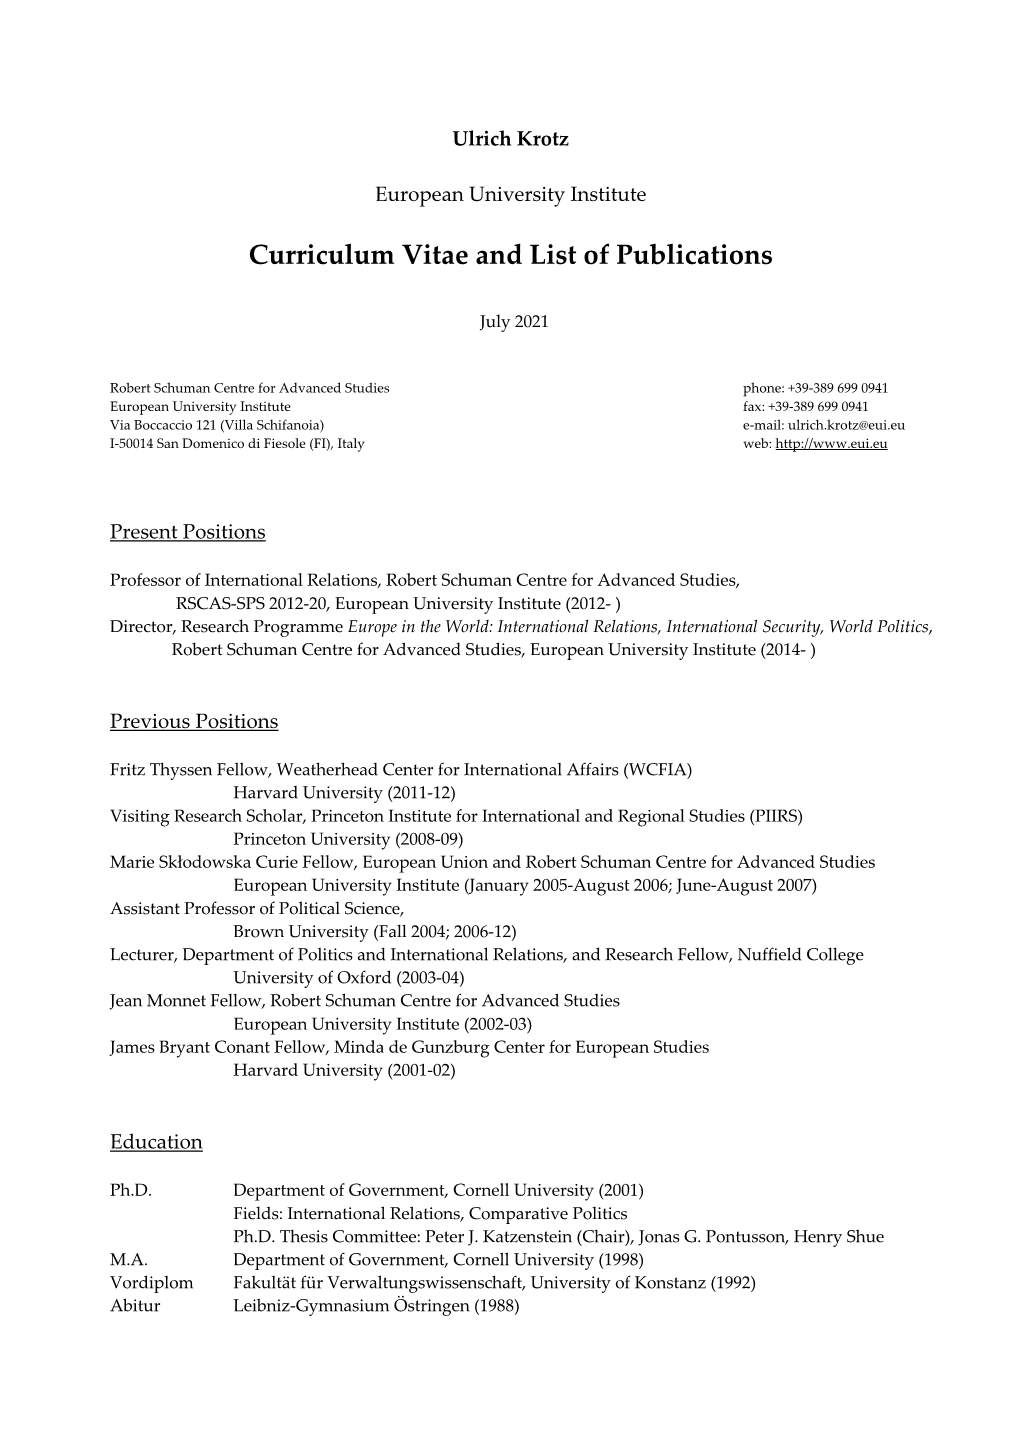 Curriculum Vitae and List of Publications